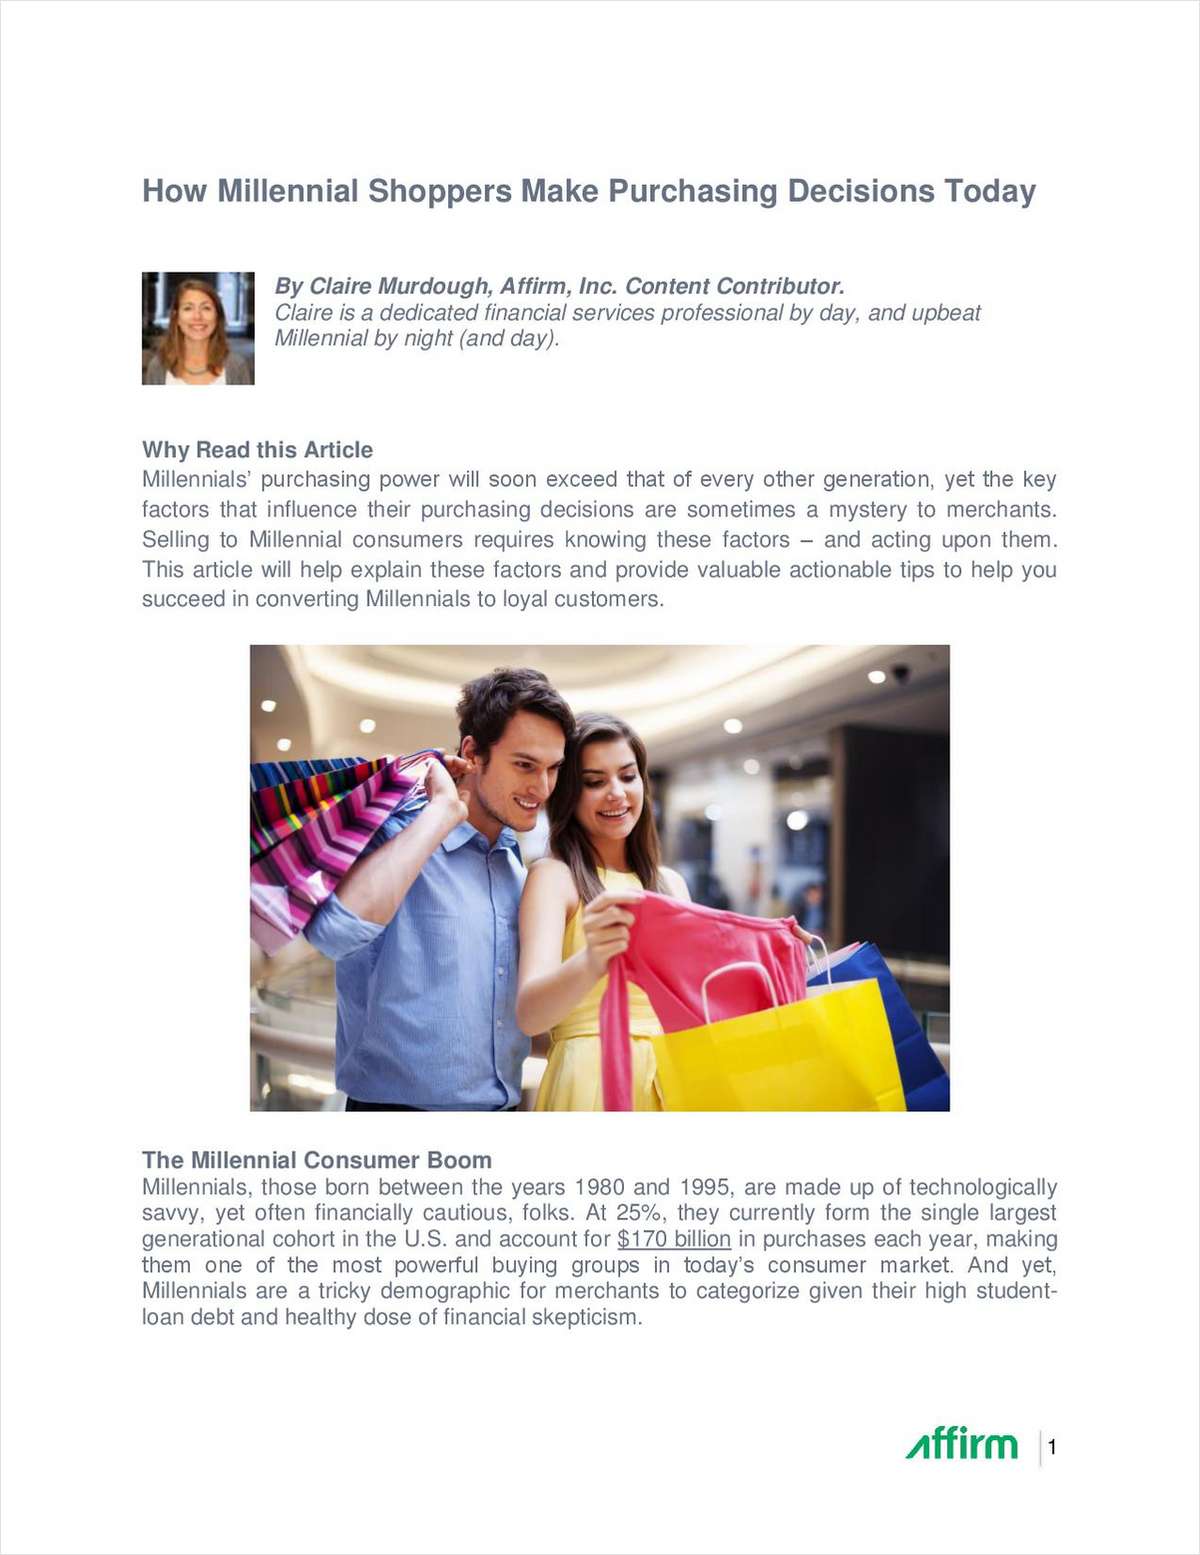 How Millennial Shoppers Make Purchase Decisions Today